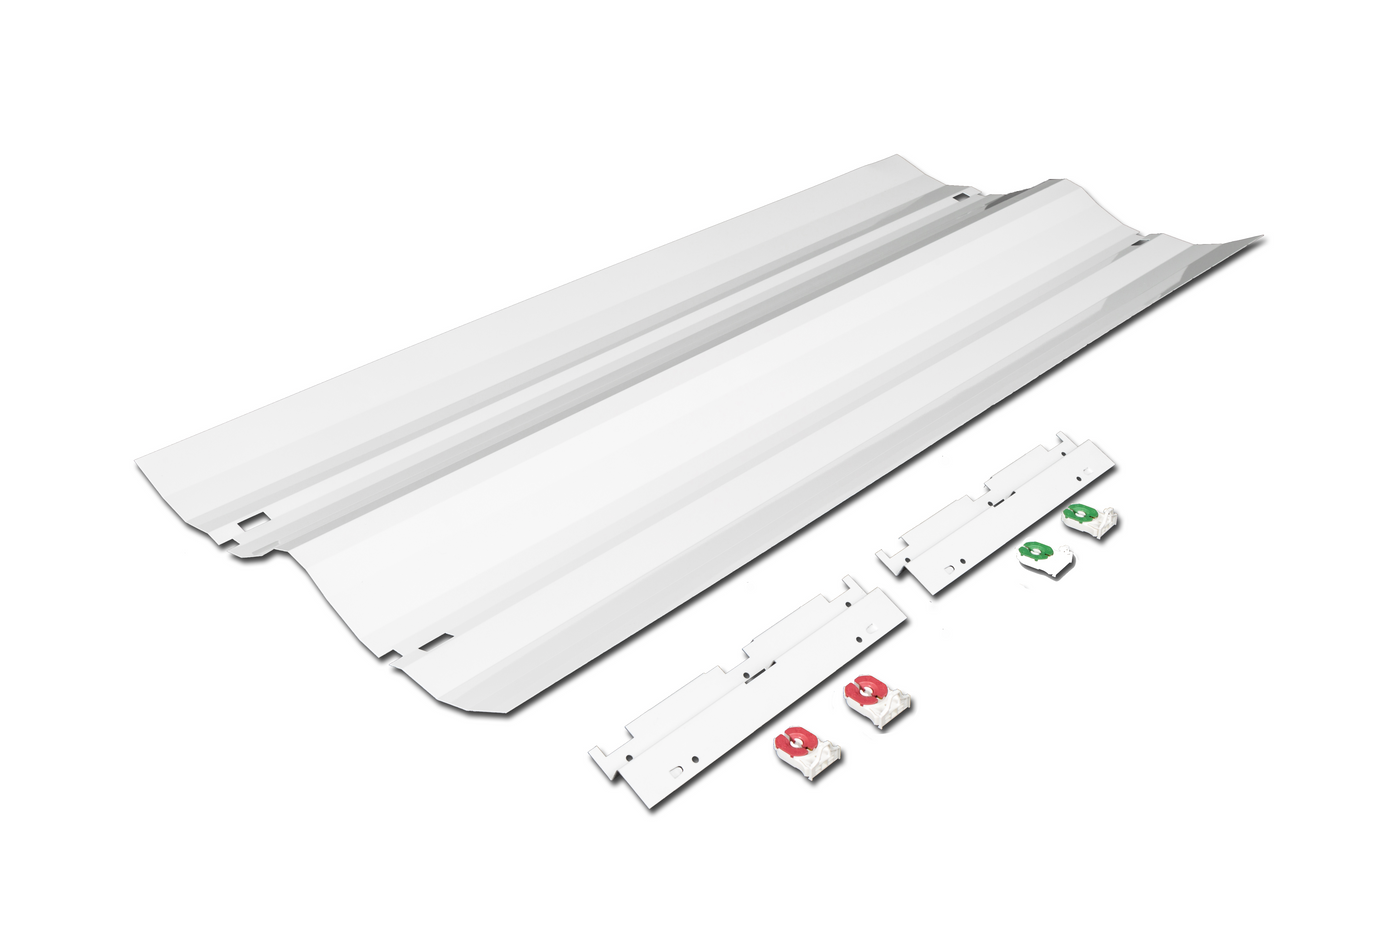 2 x 2 Foot Retrofit Kit White or Mirrored Reflector for Troffer Body 4500-5625 Lumen 2 or 3 15W LED 4000K Lamps Included